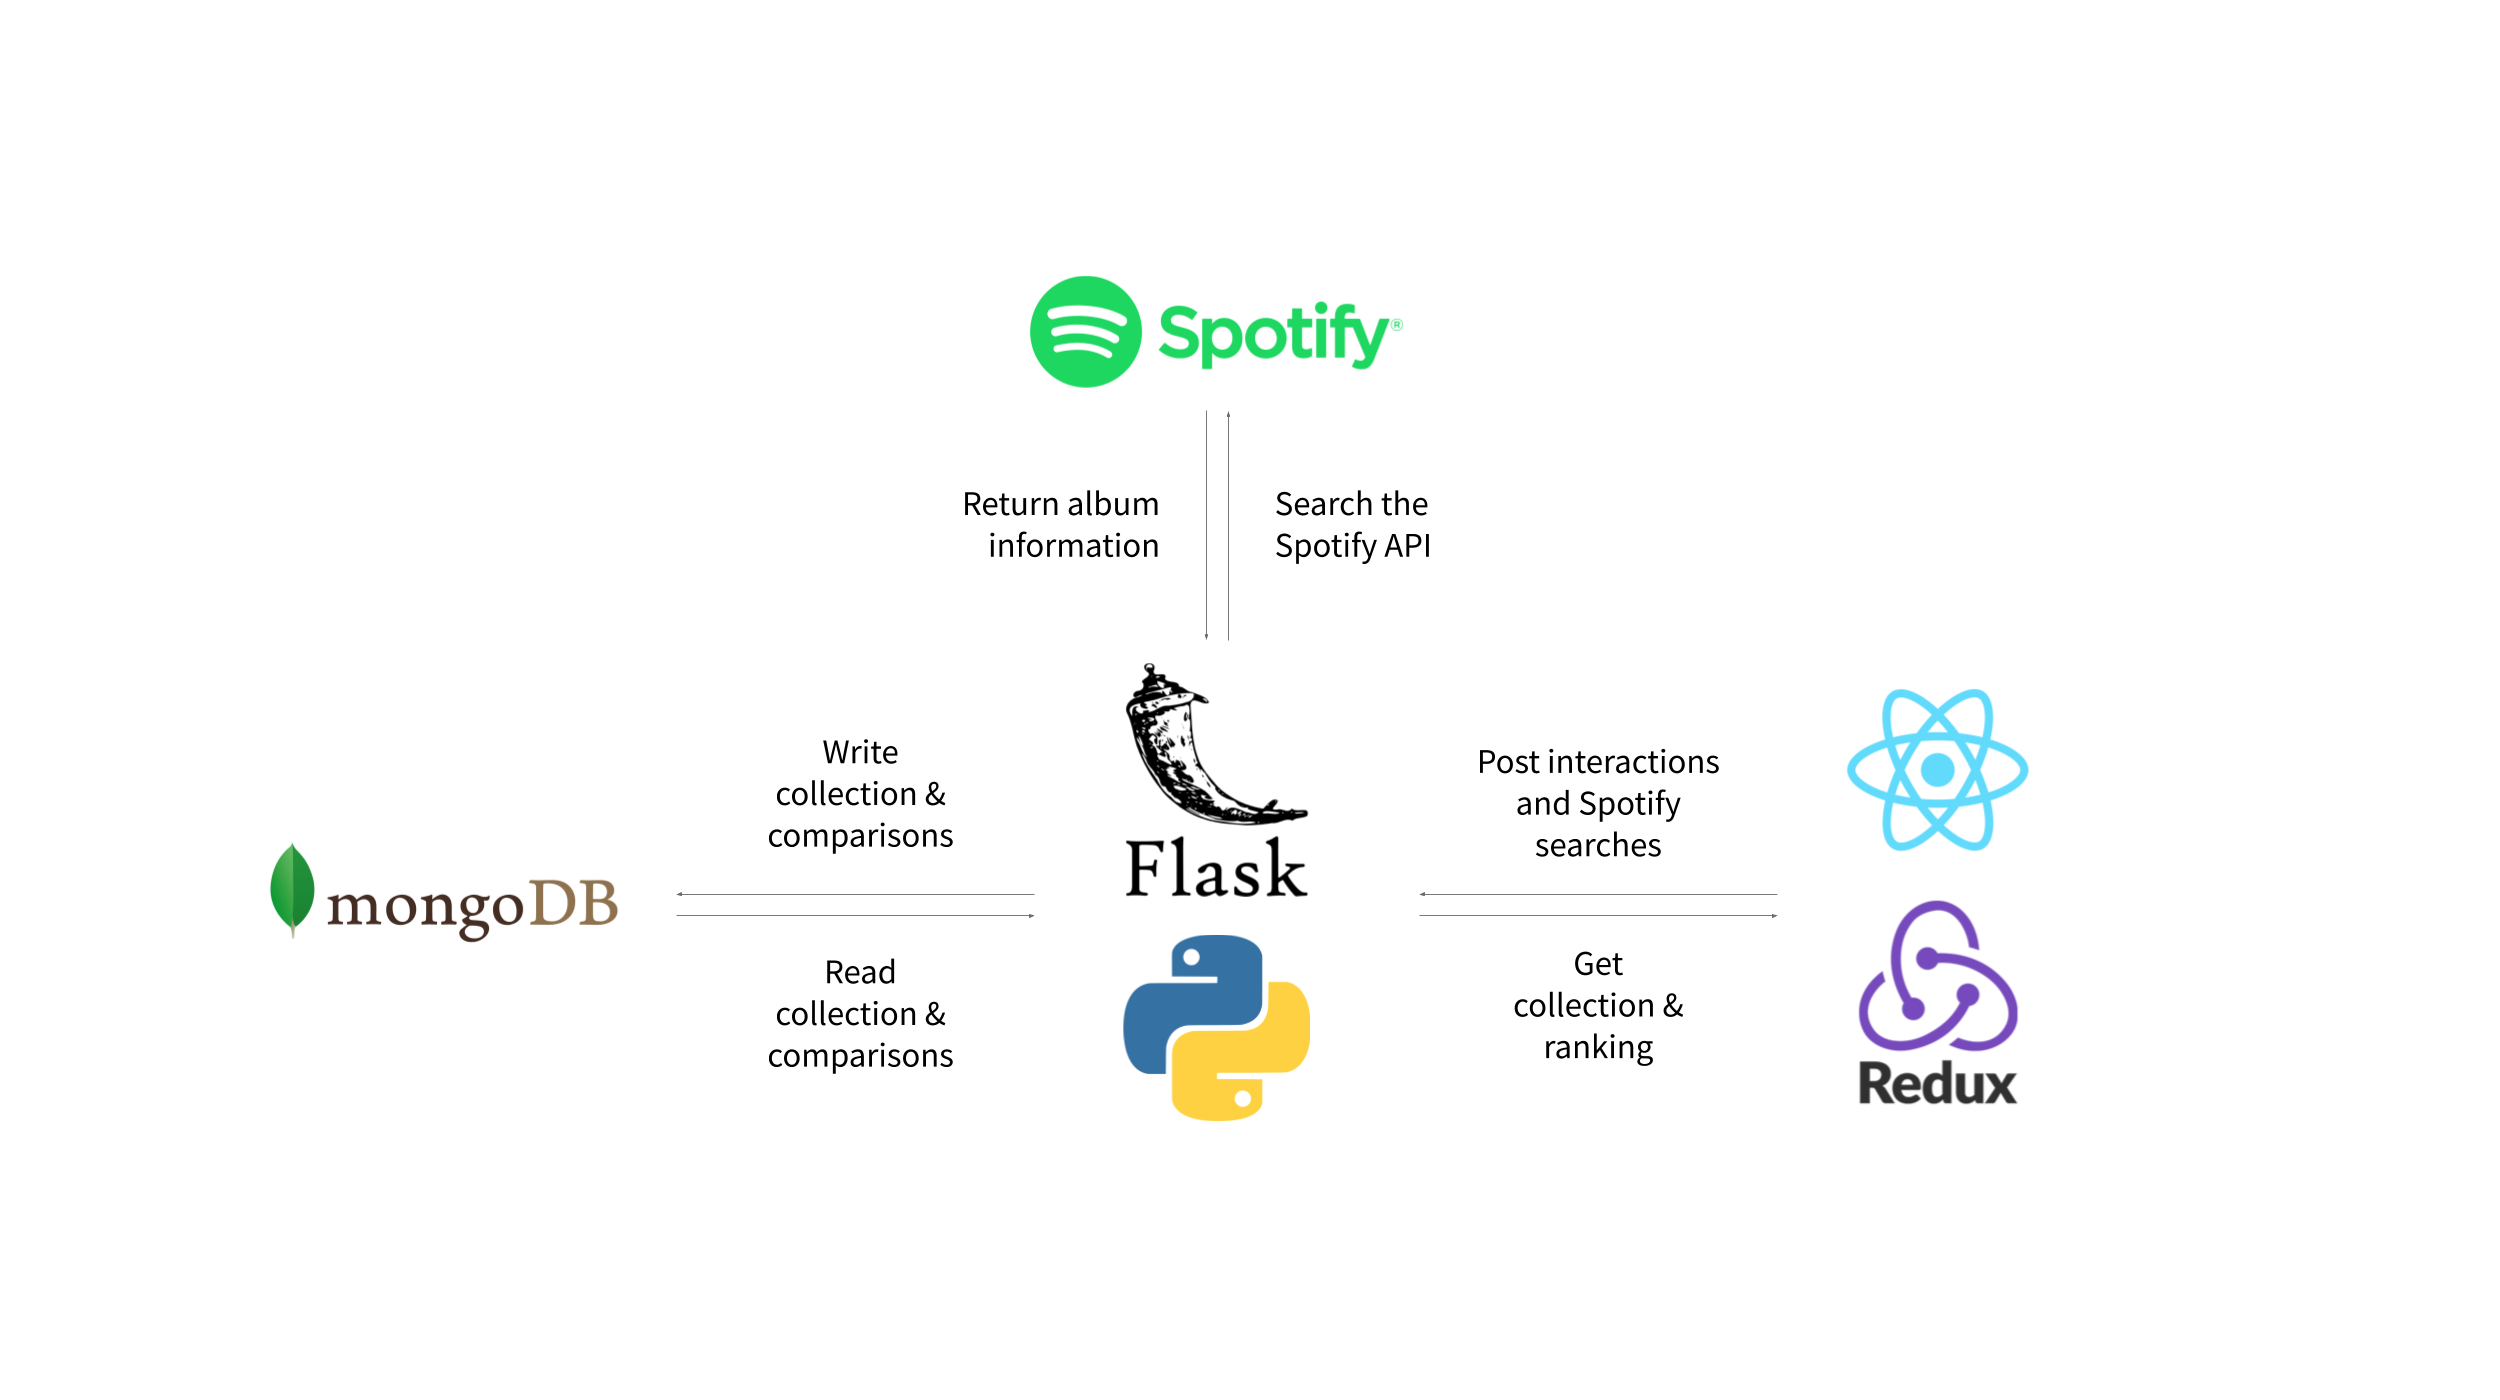 The application's architecture relies on Python, Flask, React/Redux, mongo DB, and the Spotify API